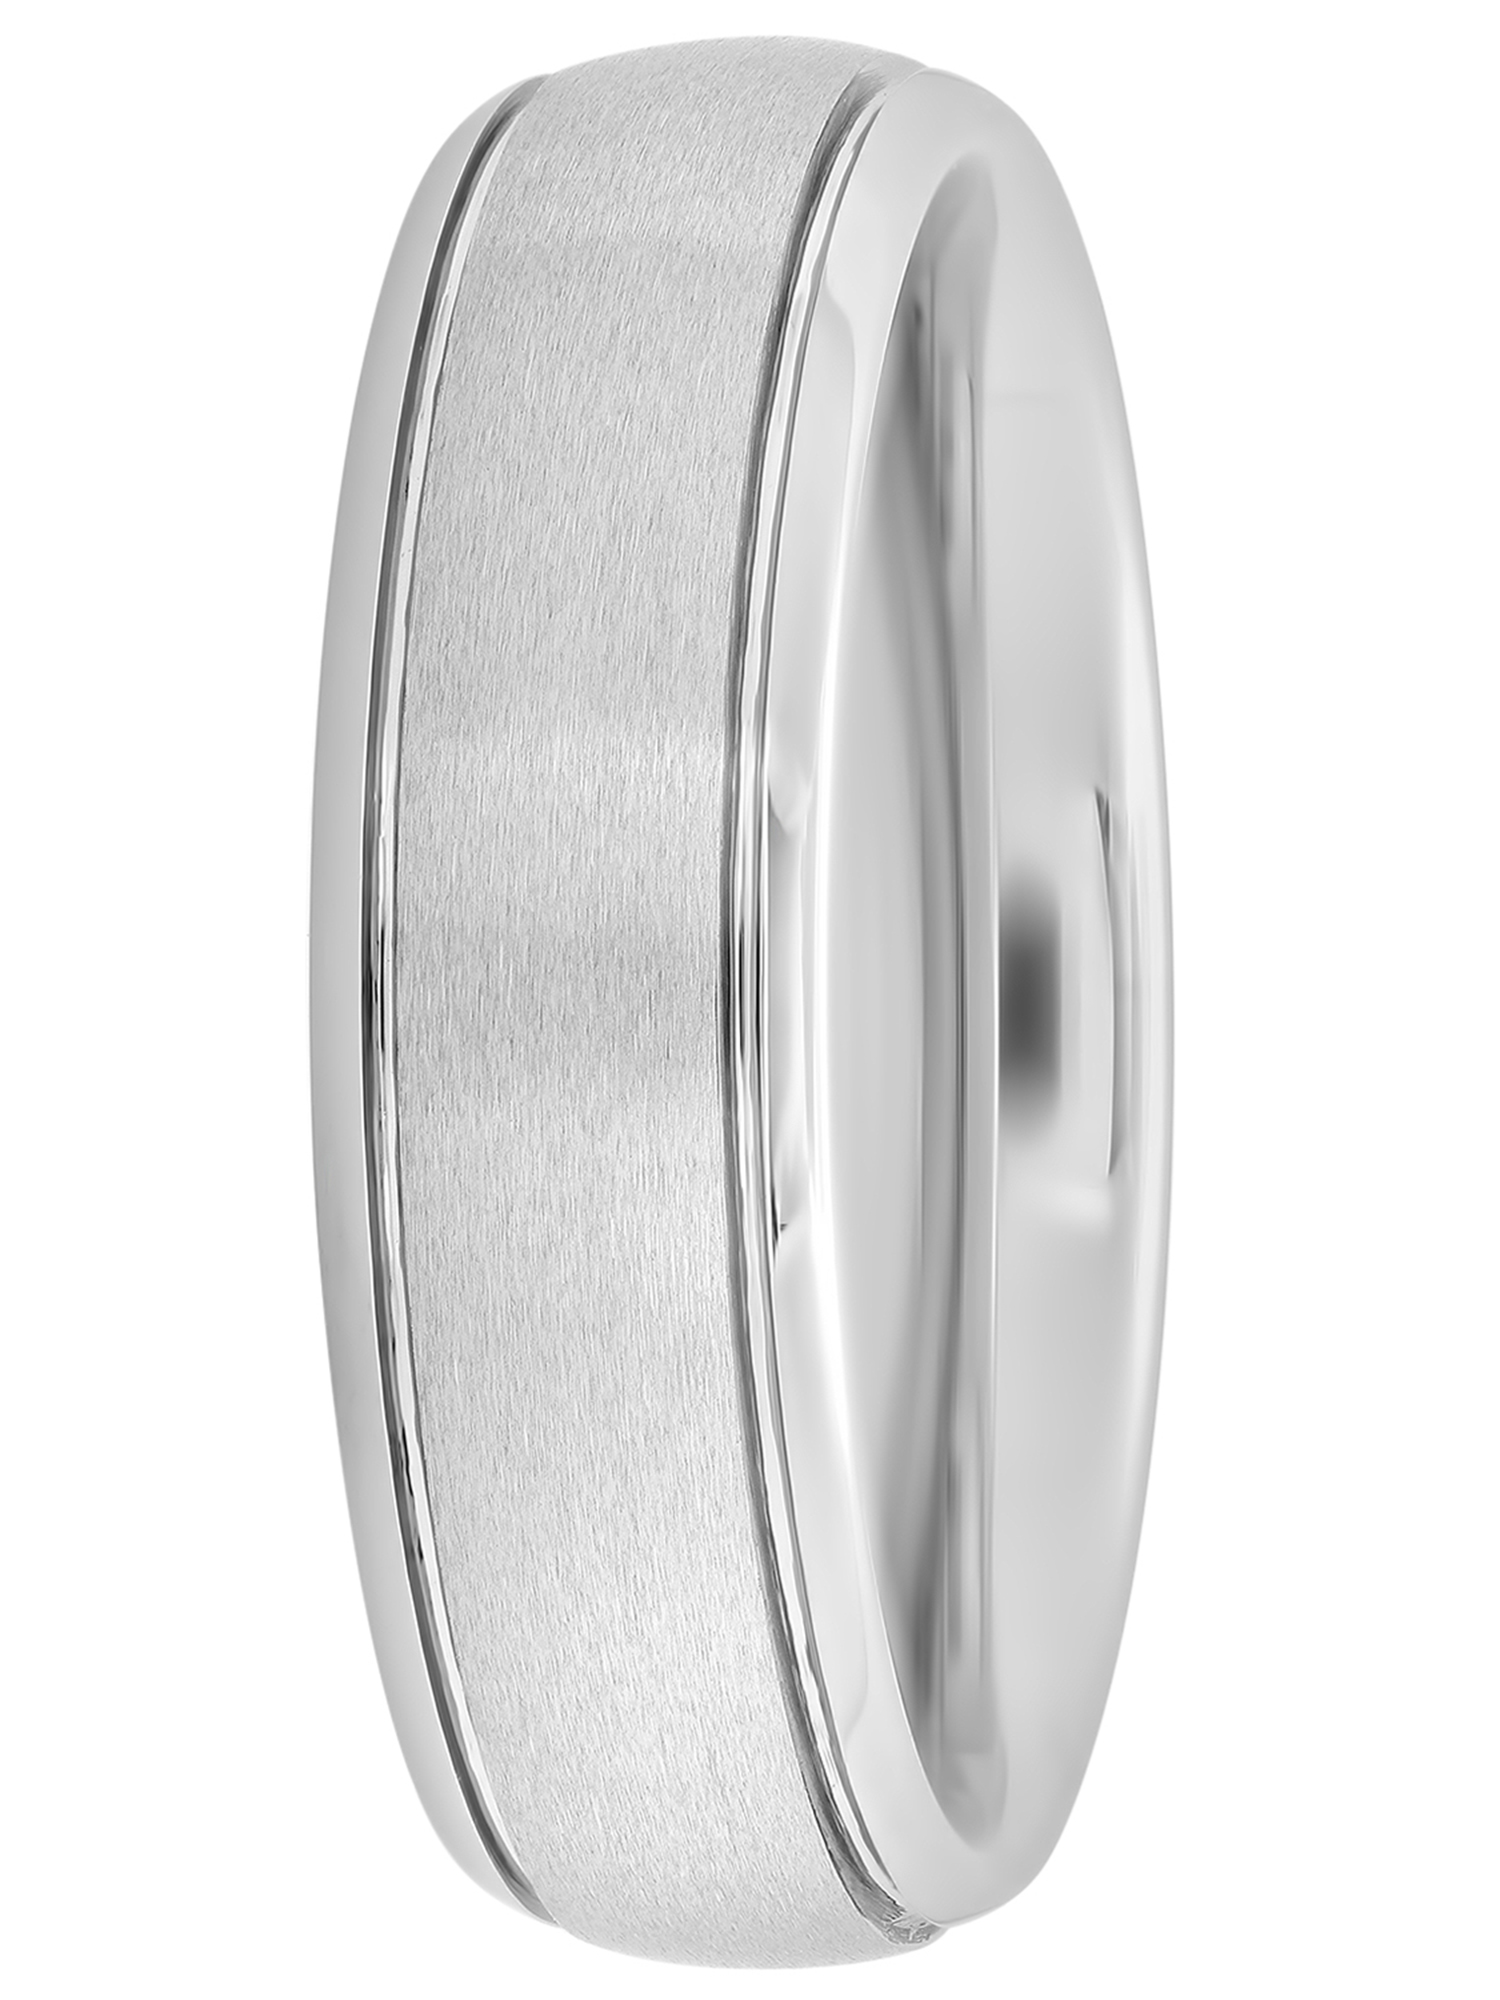 Men's Tungsten 6MM Grooved Satin Wedding Band - Men's Ring - image 3 of 5